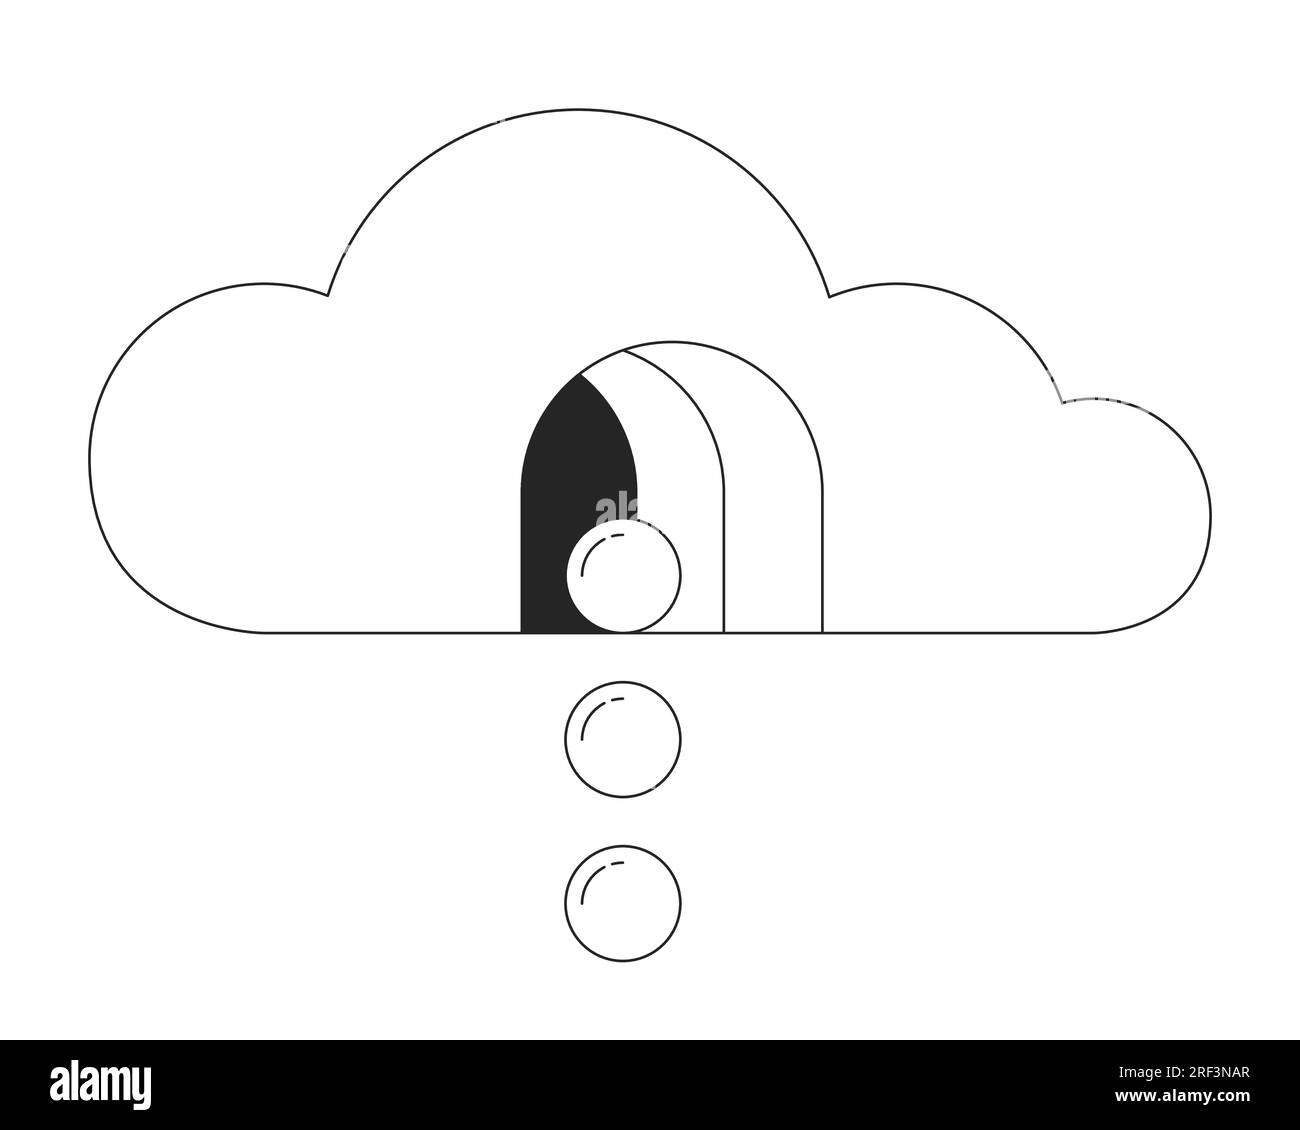 Spheres dropping from surreal cloud flat monochrome isolated conceptual clipart Stock Vector